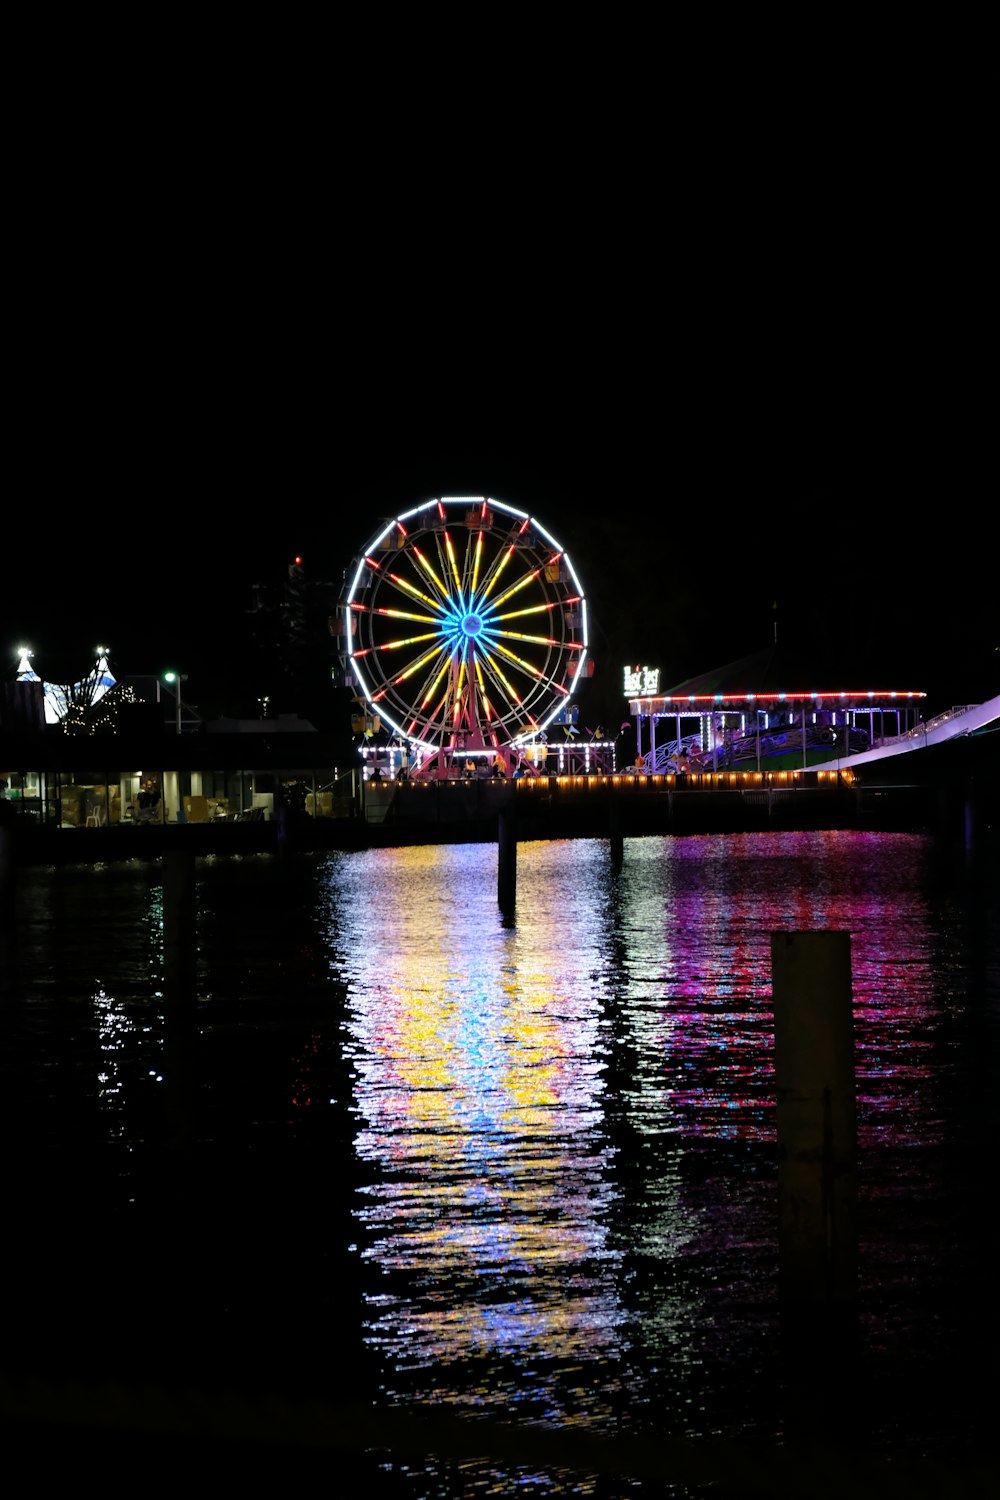 lighted Ferris wheel reflecting on body of water